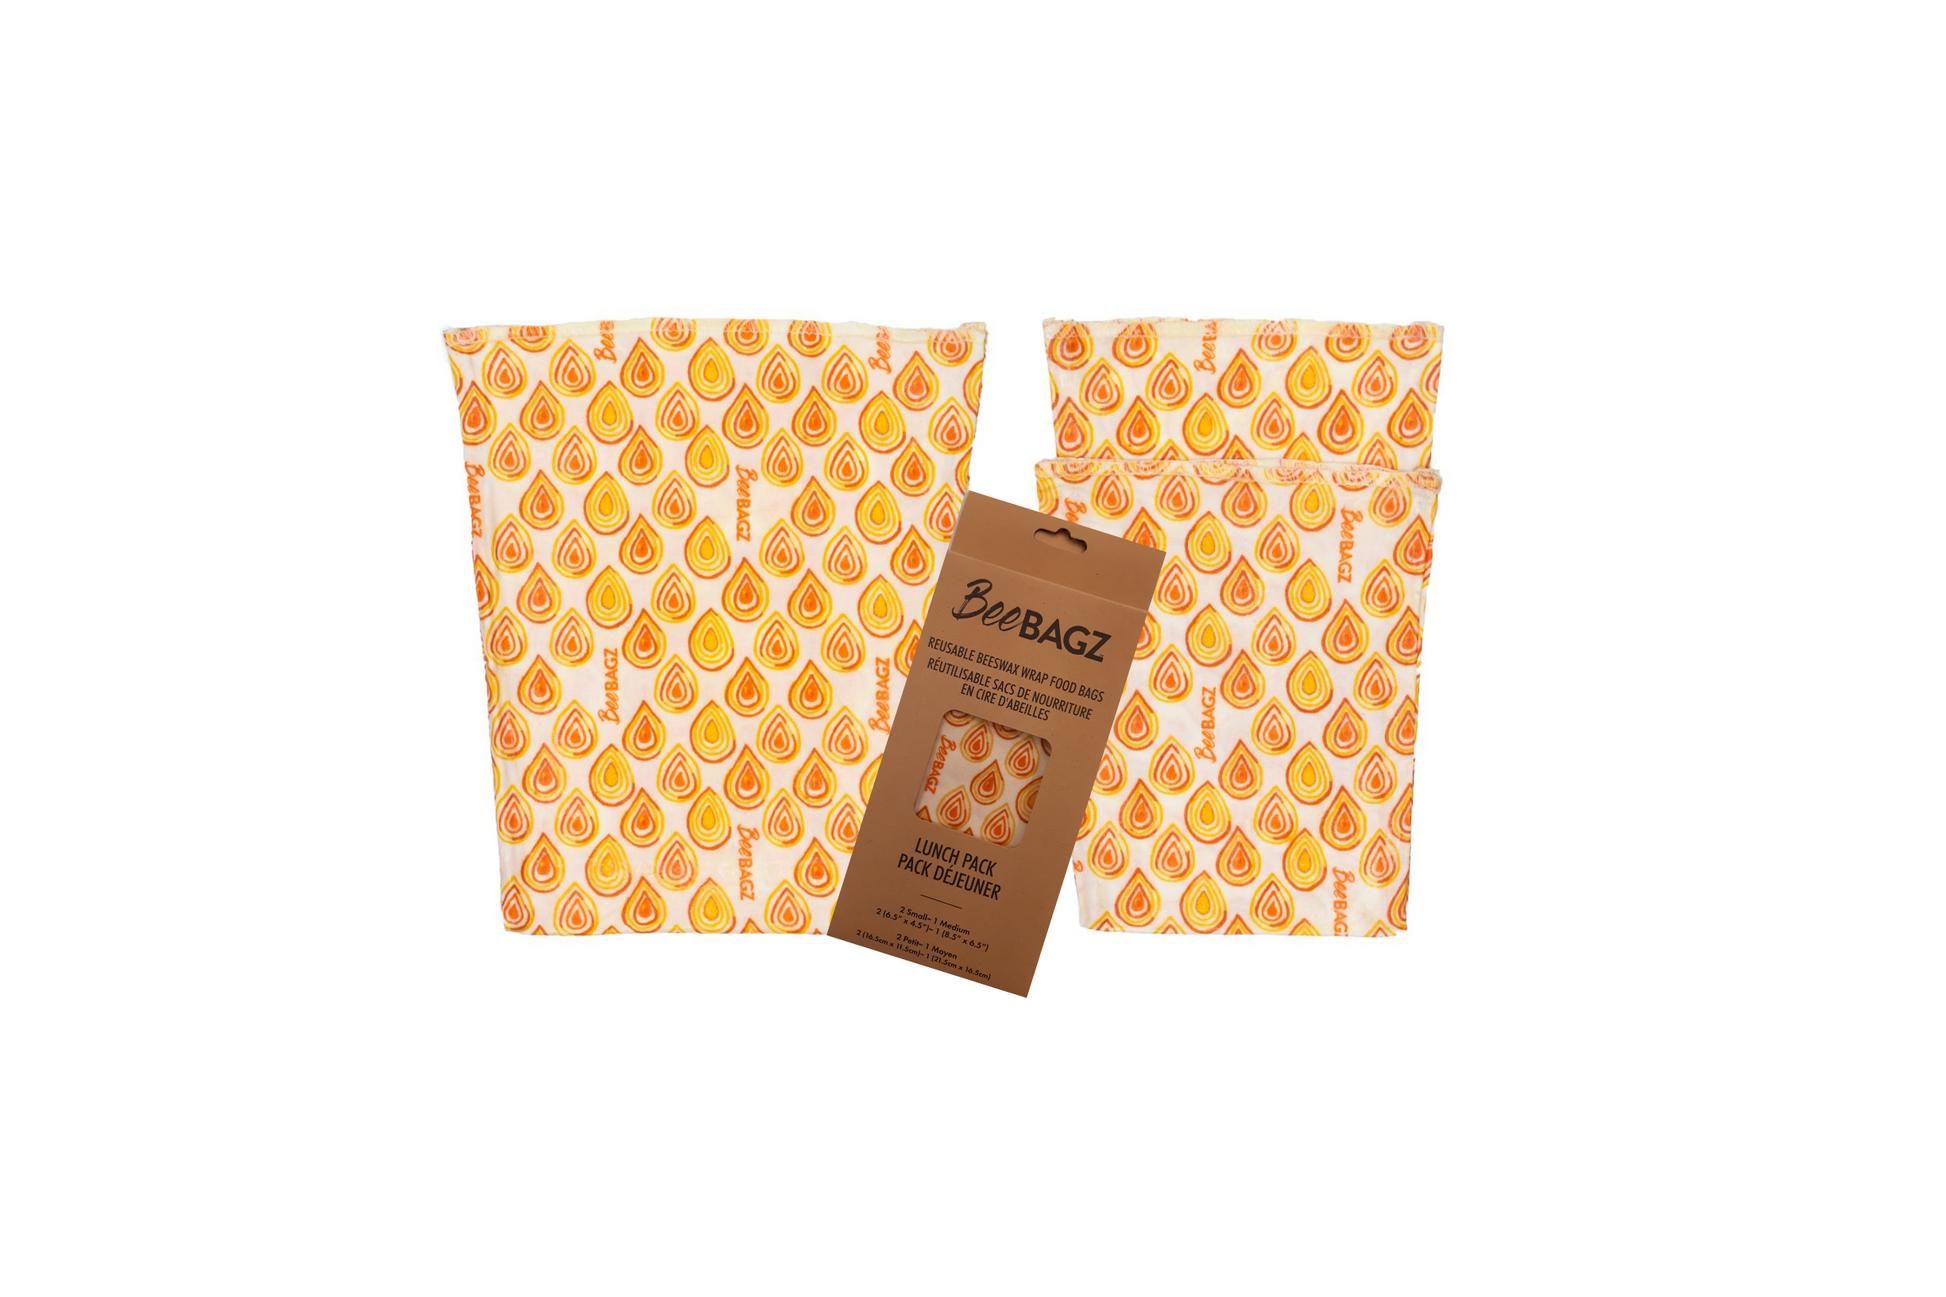 Beeswax wrap and reusable food storage bags by BeeBAGZ are a plastic free alternative to plastic wraps & ziplocked bags for your food storage needs. These beeswax wraps and beeswax wrap bags are a great eco friendly gift and can be used as food wraps, produce bags, snack bags, lunch bags or sandwich bags. Shop today!